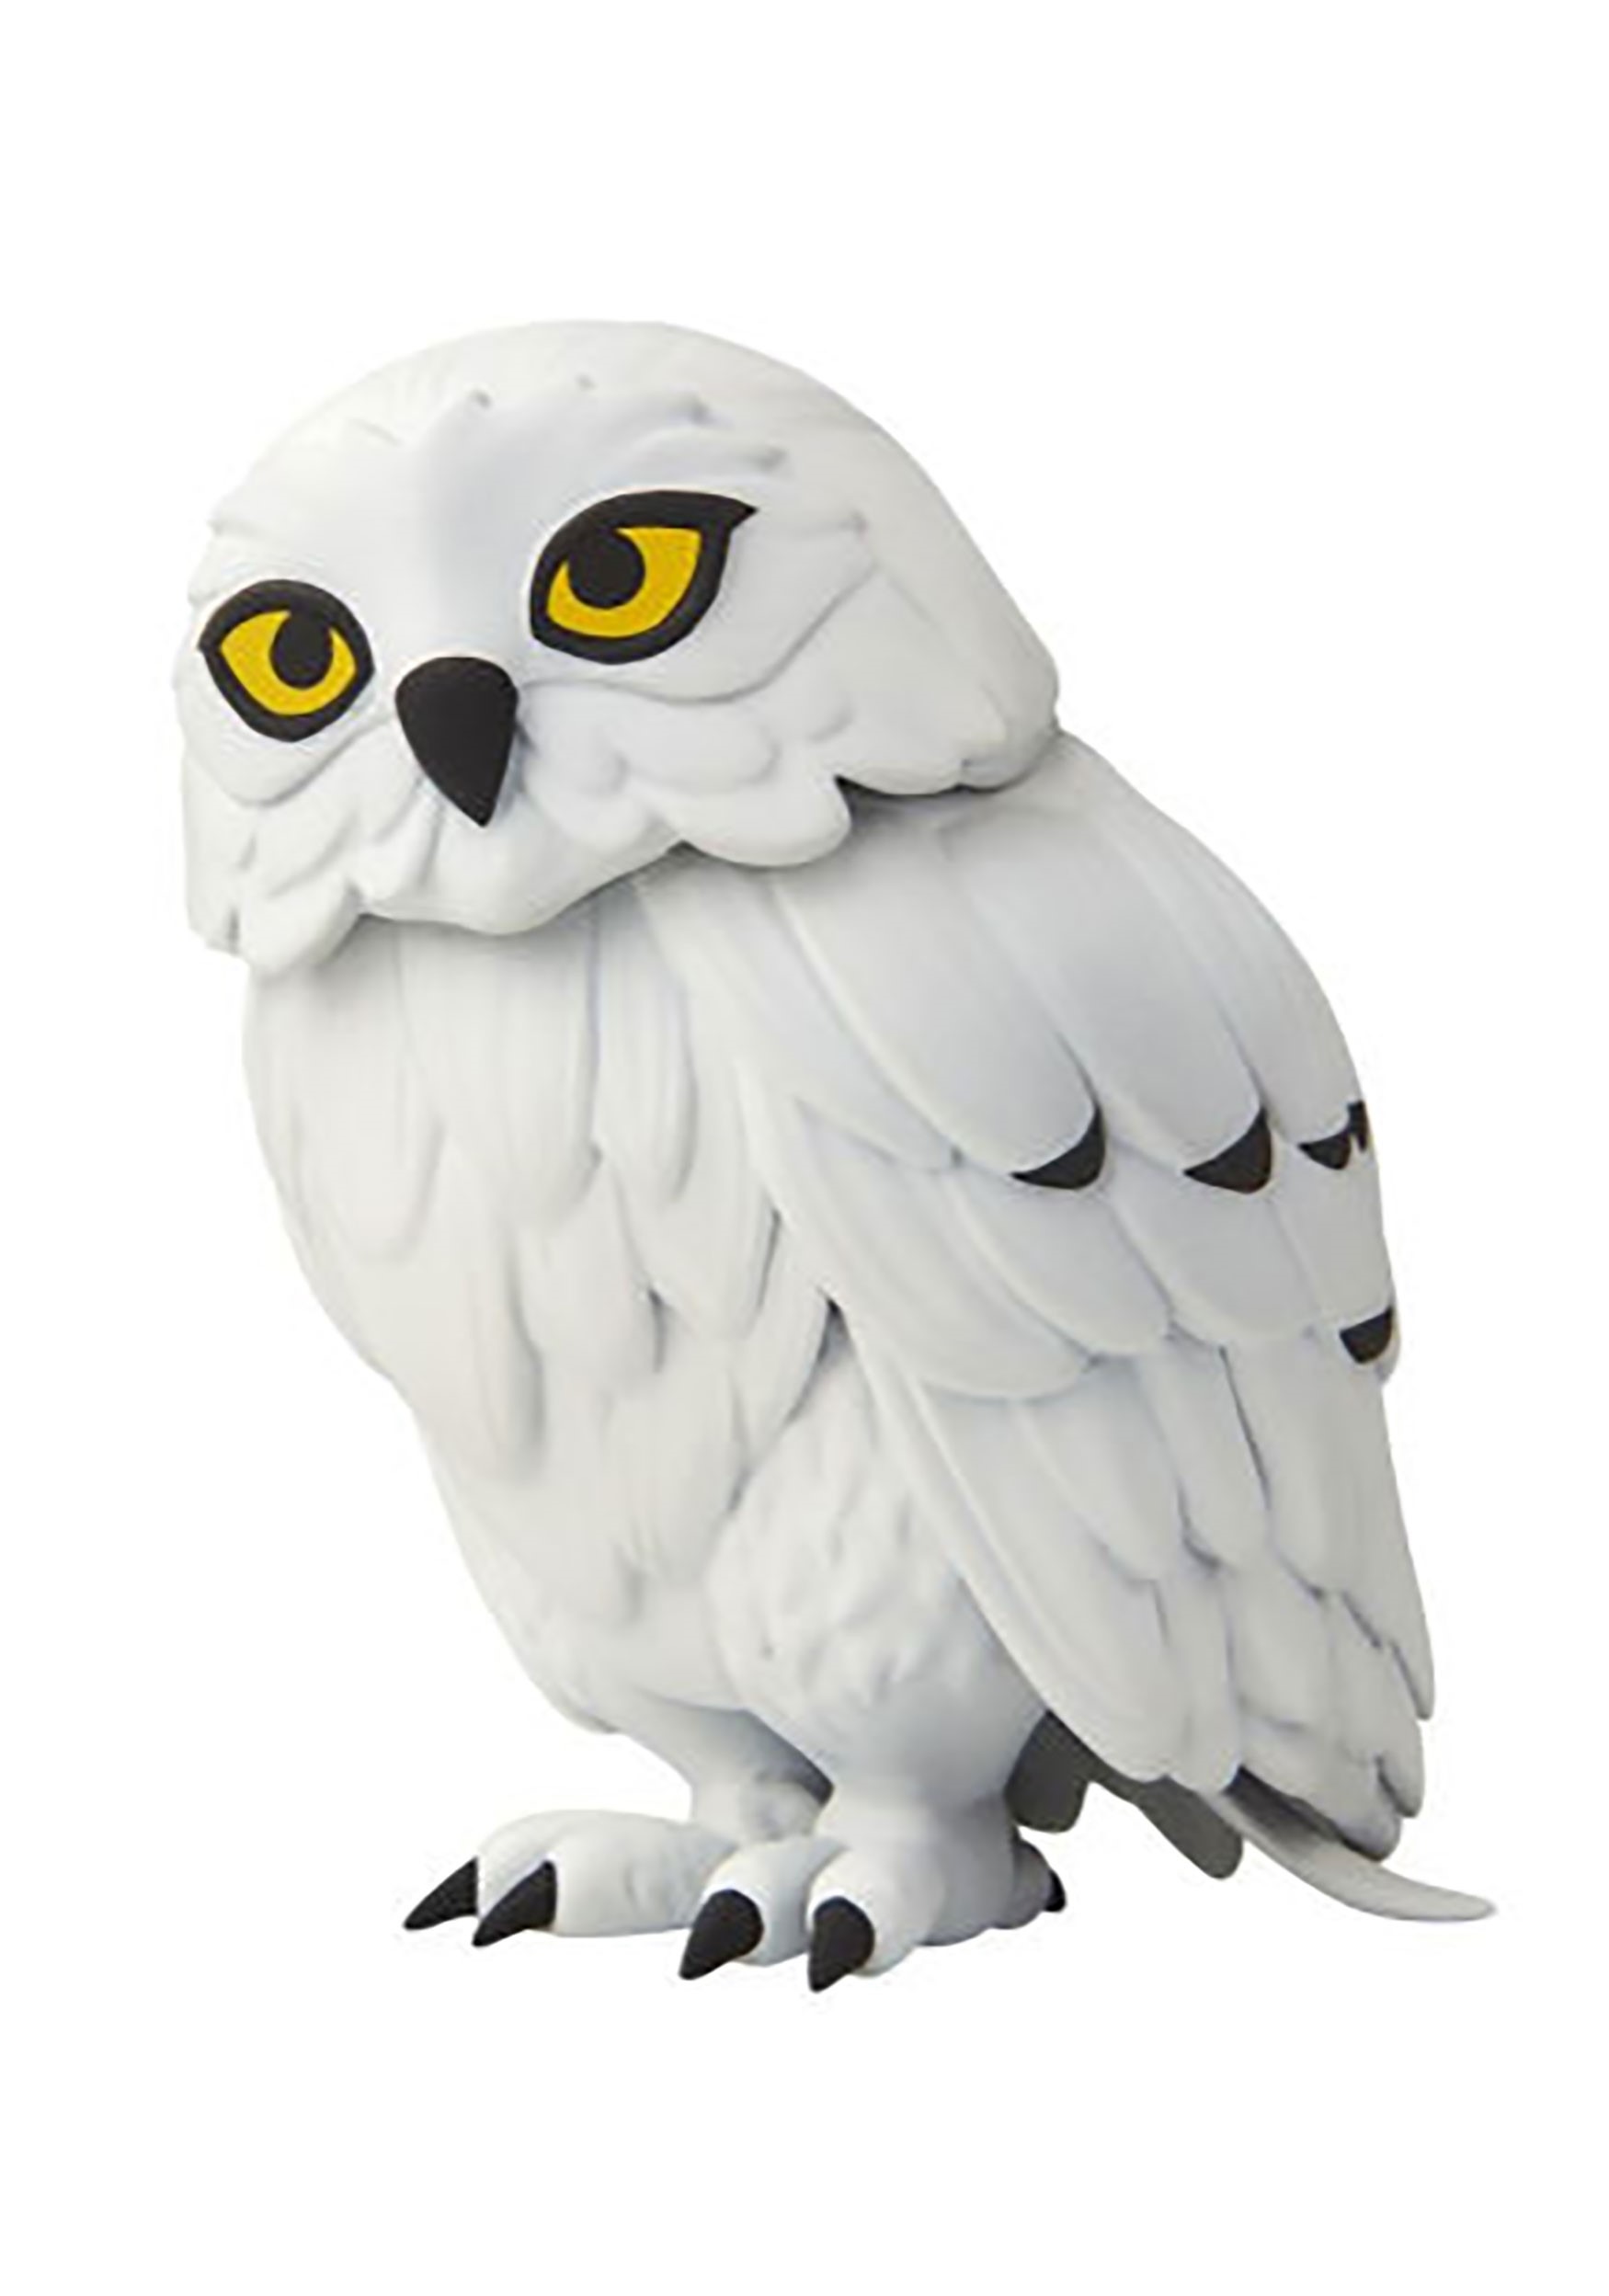 Harry Potter Interactive Creature Hedwig